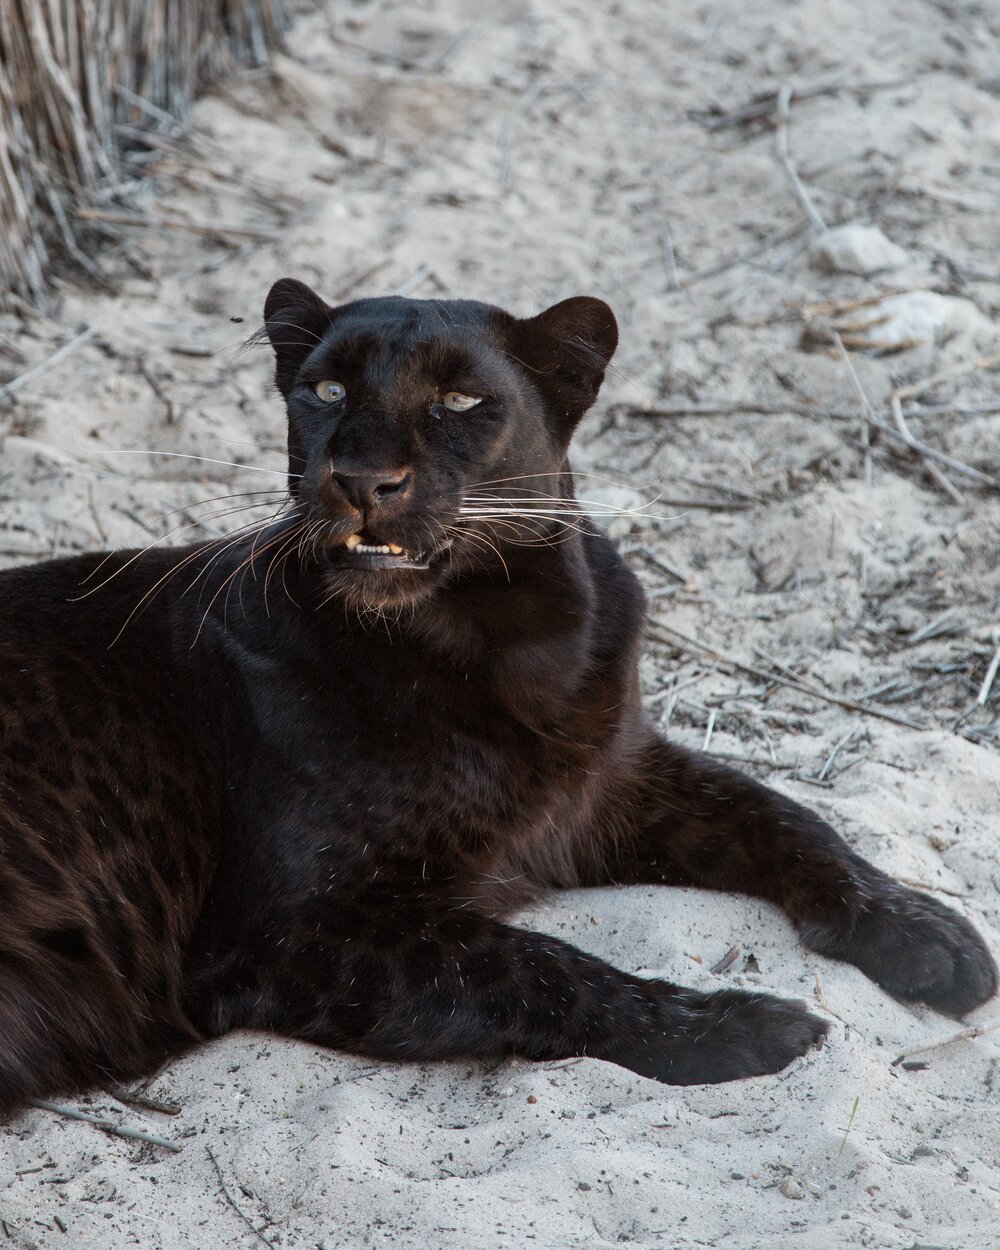 The significance behind the magnificent creature: Black Panthers — F O R M  F L U E N T